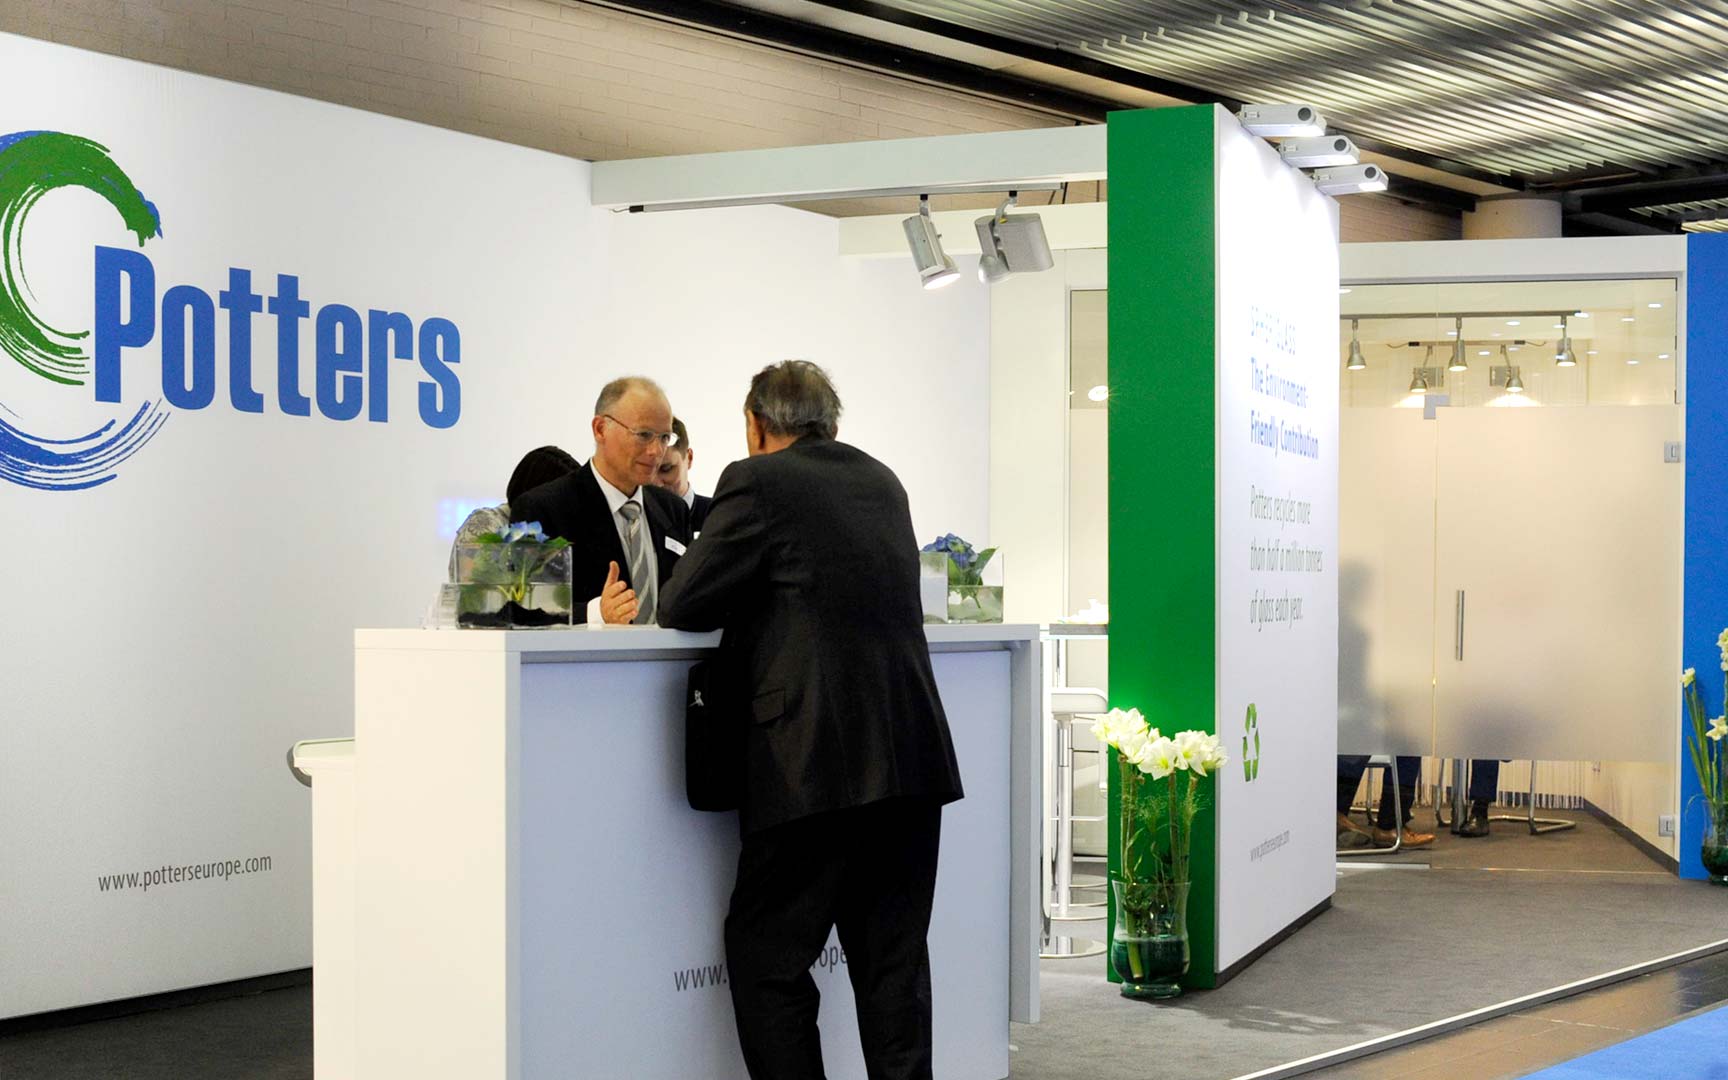 Potters_messe_2013_1728x1080px_2